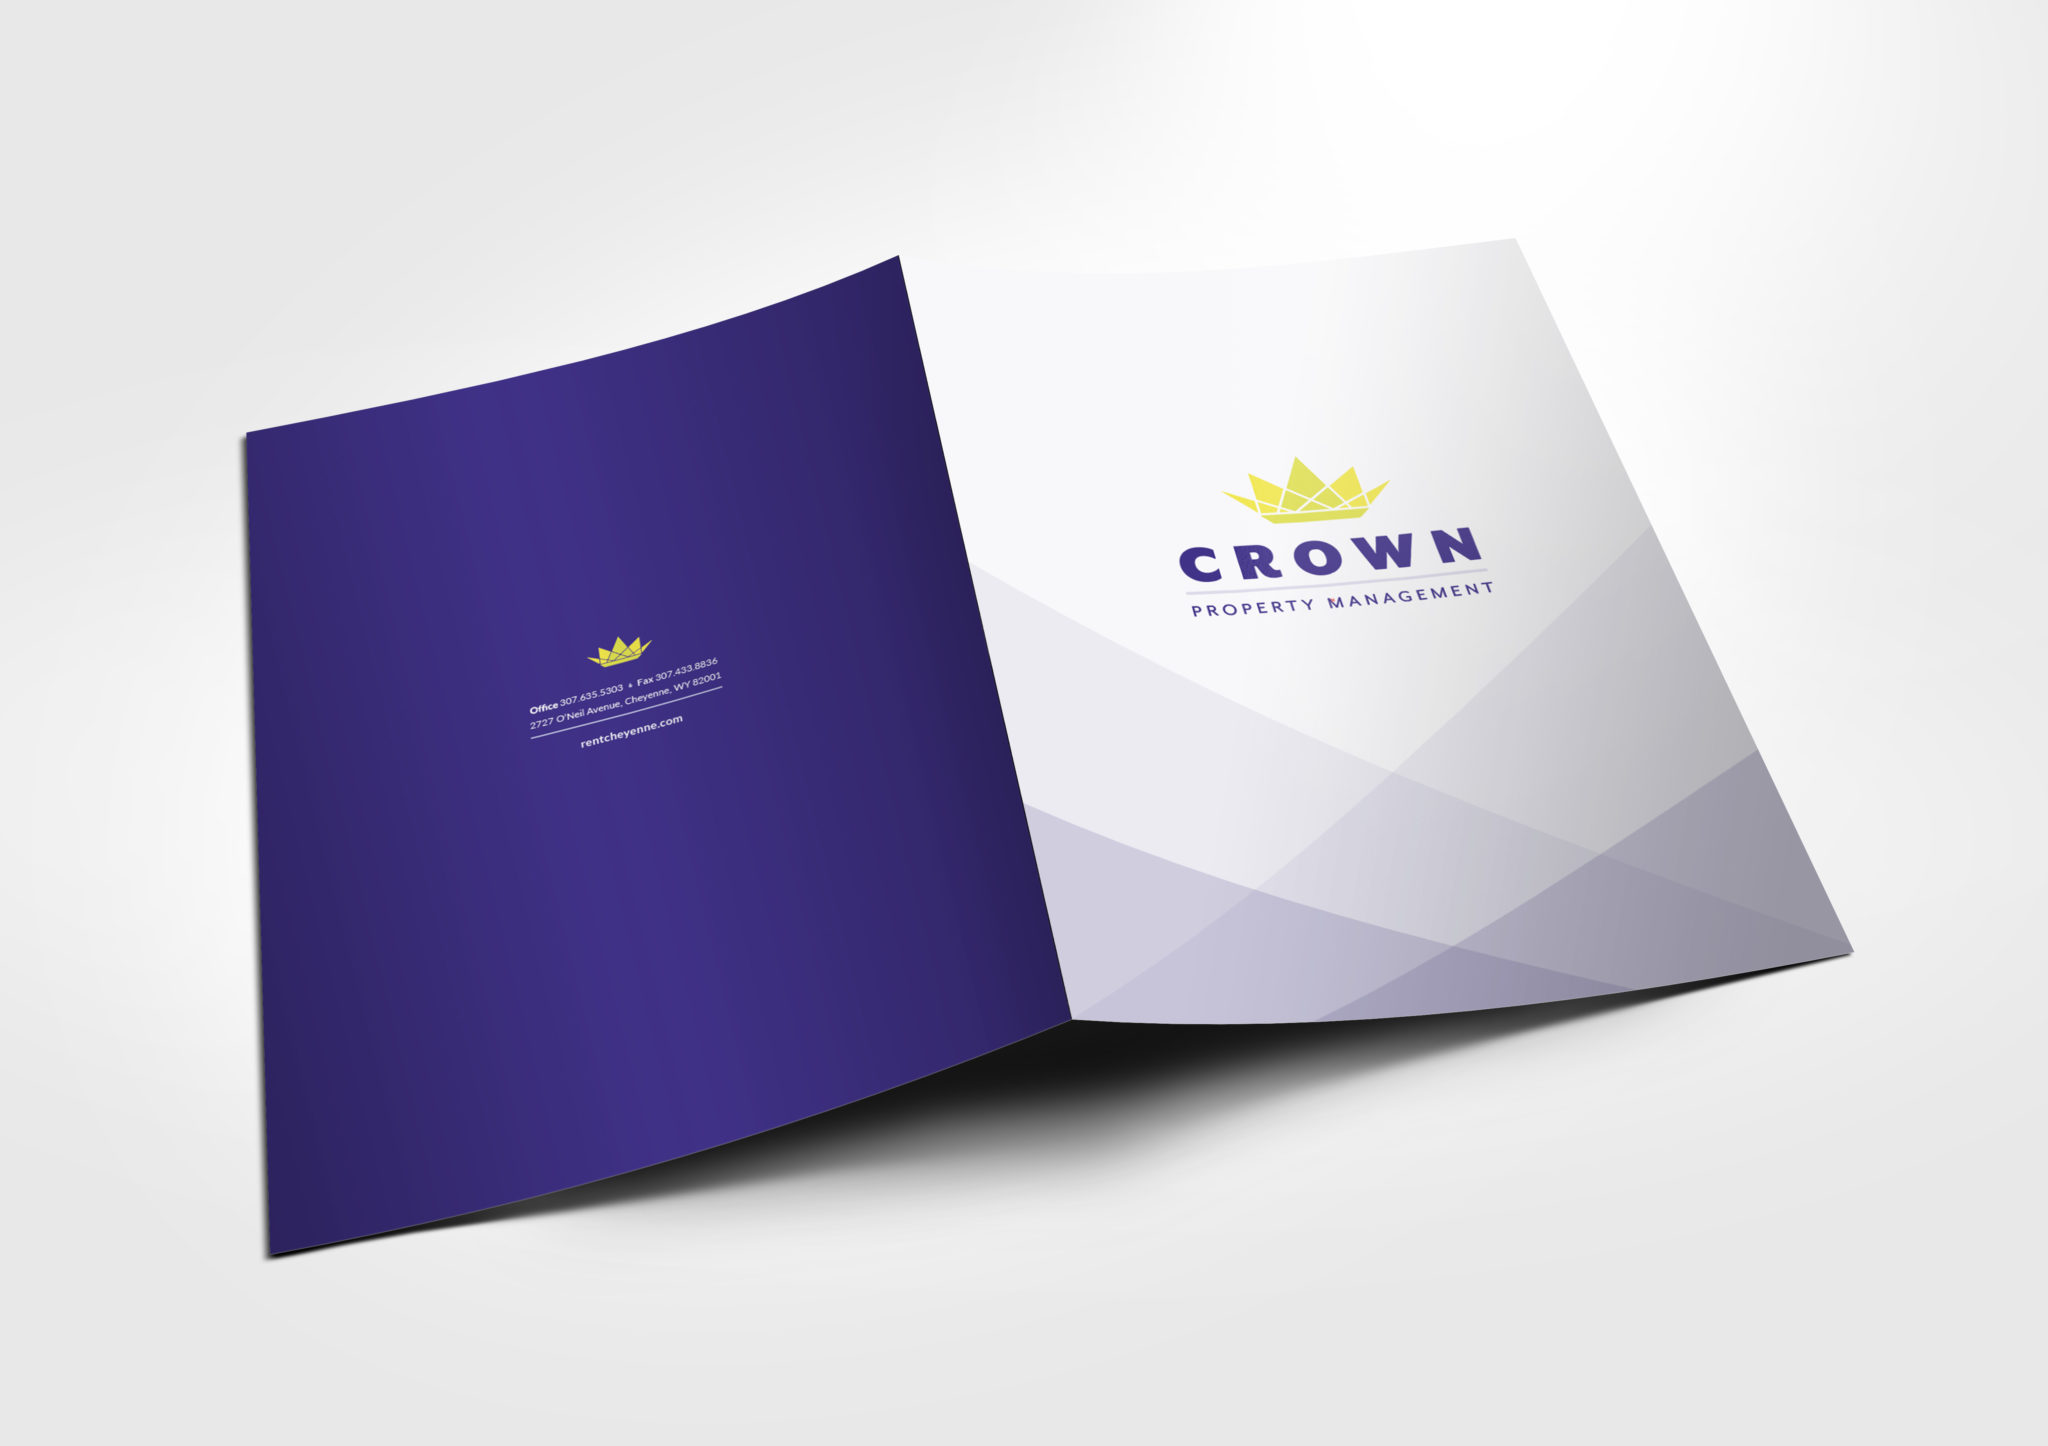 Crown Property Management folder with white background